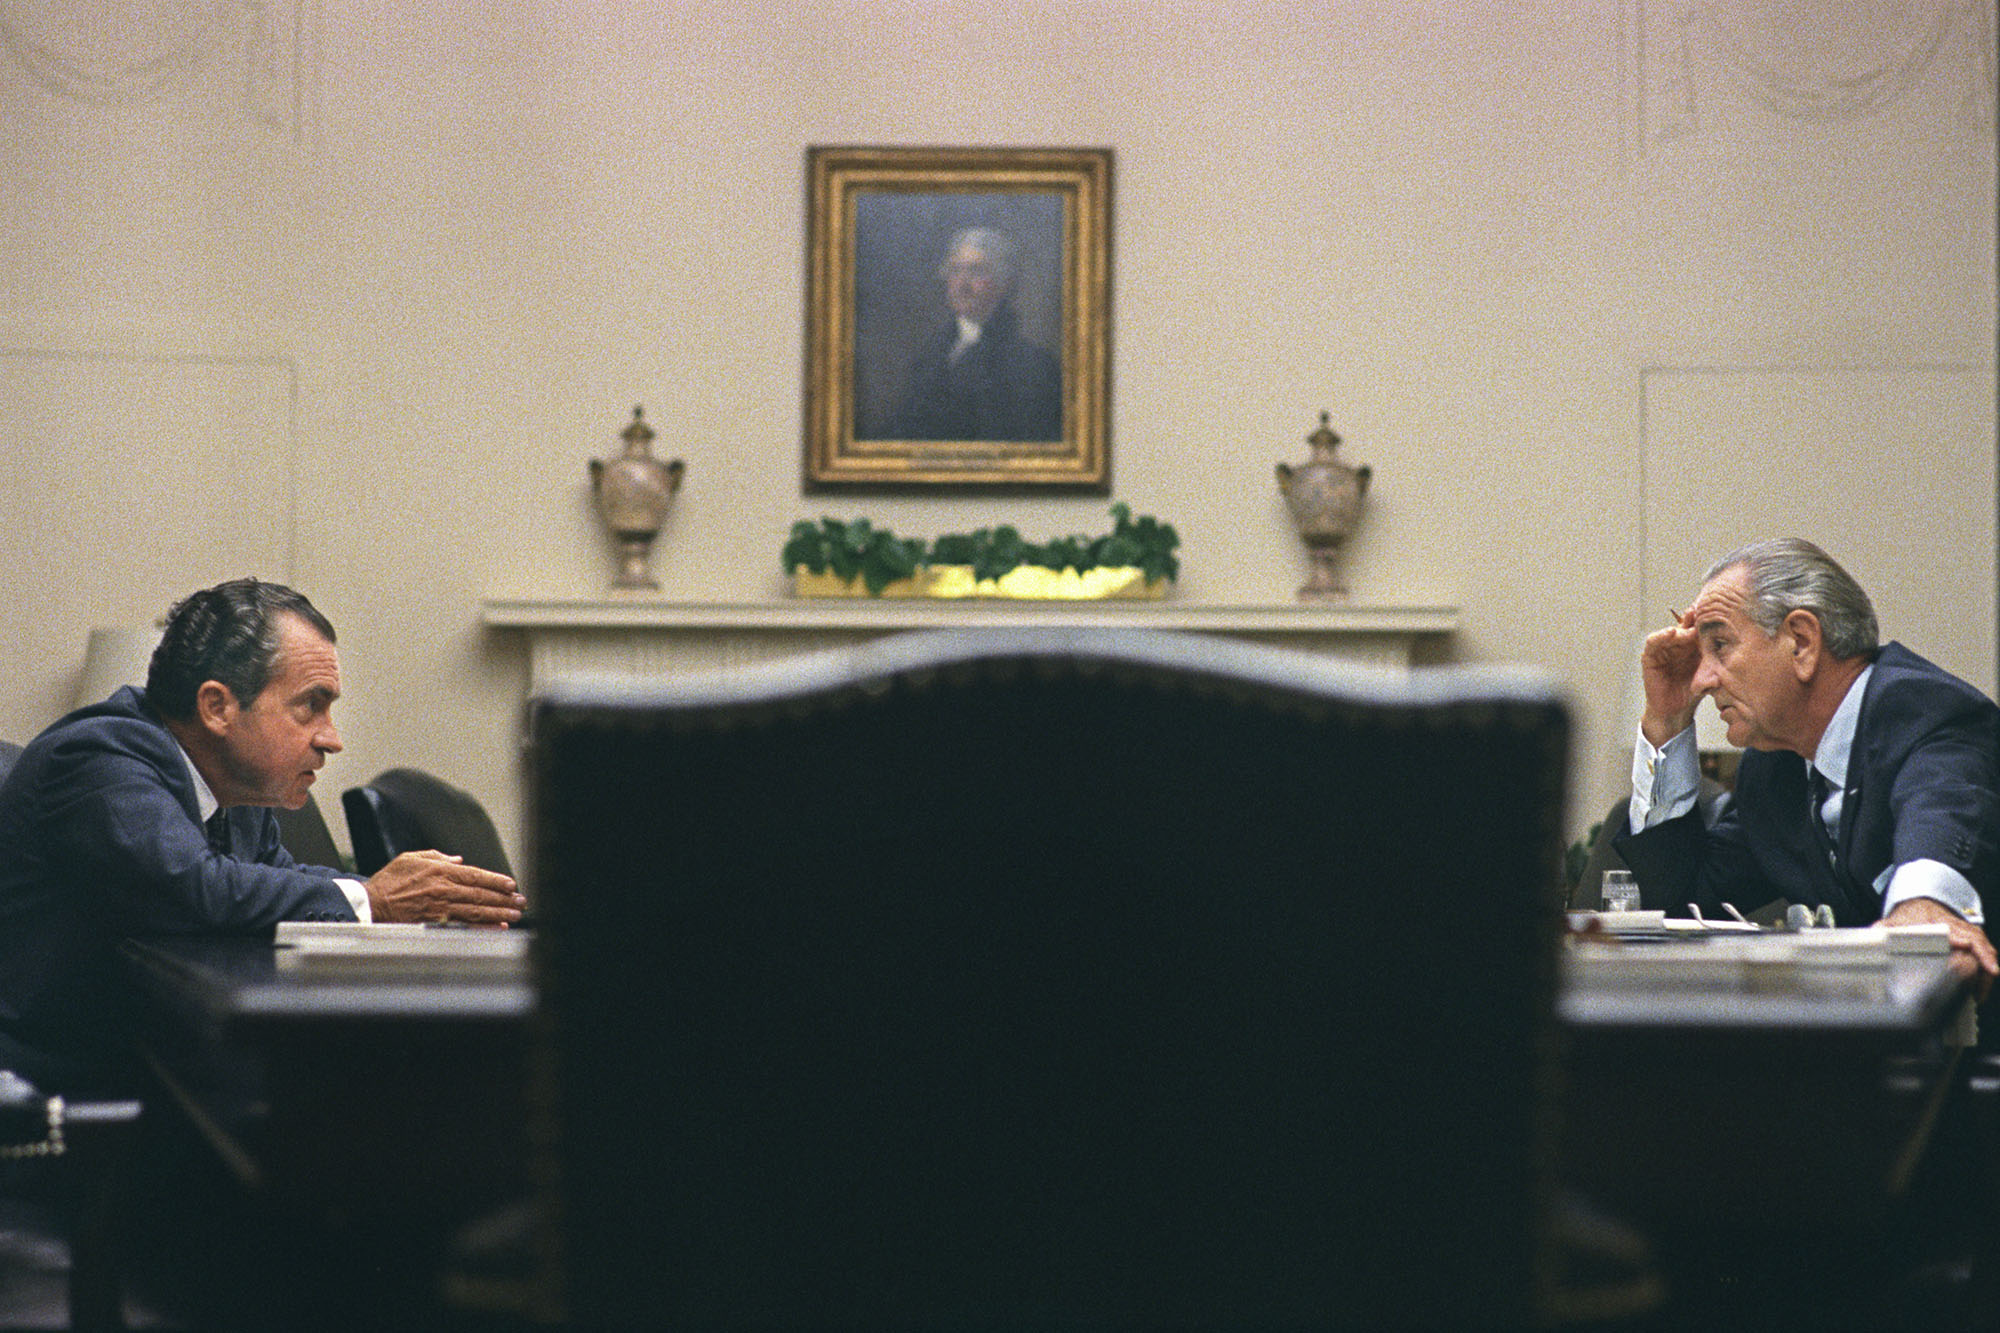 President Lyndon B. Johnson, right, and Richard Nixon, left talk across from each other at a table